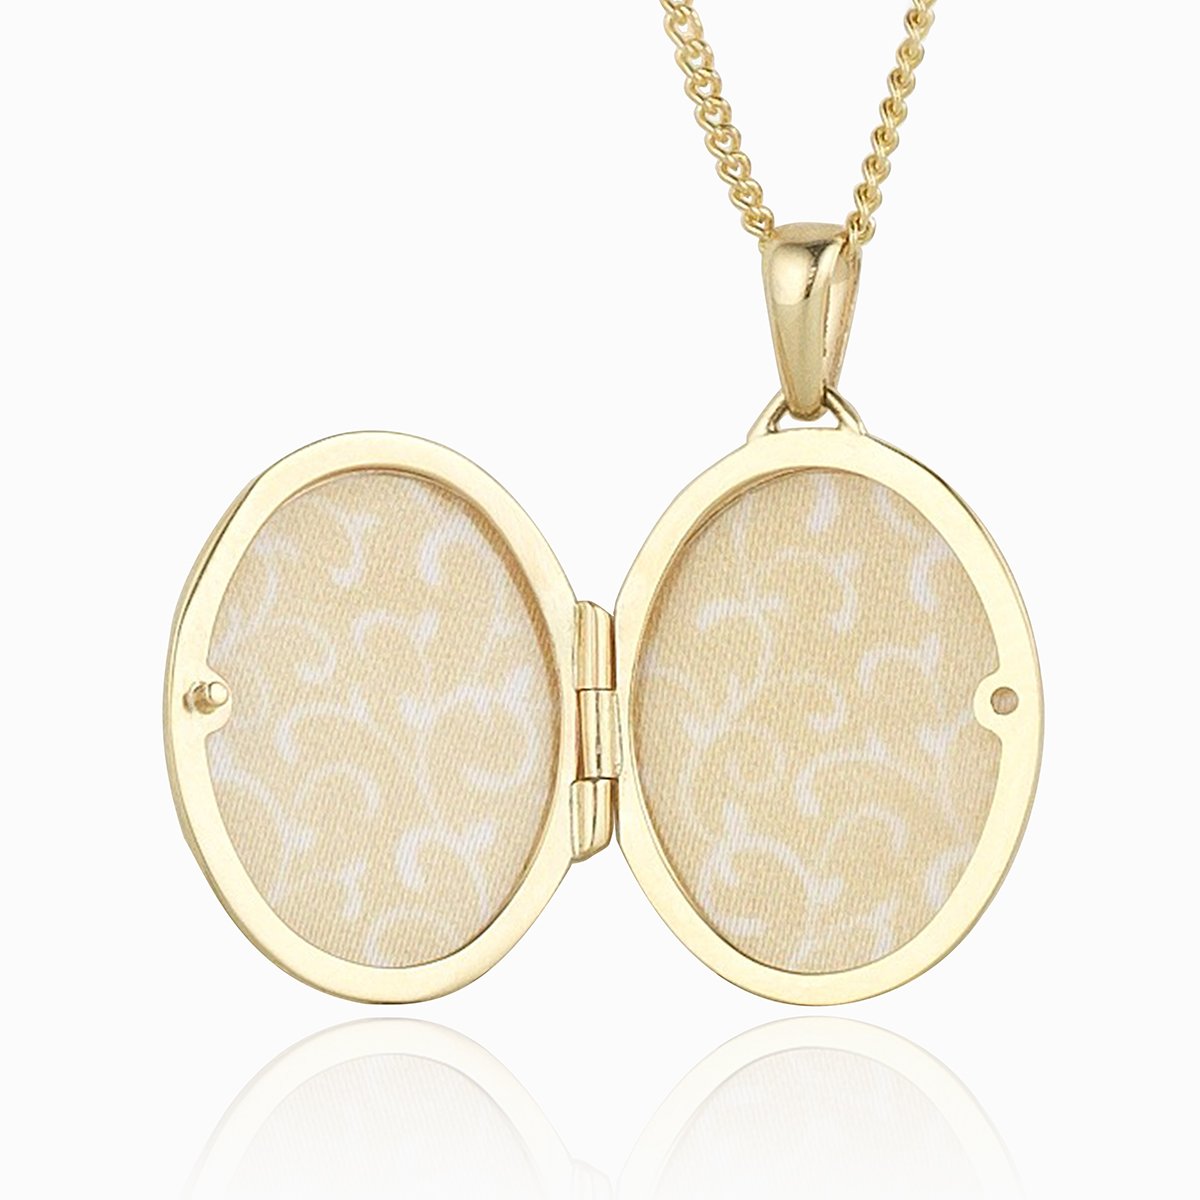 An open 9 ct gold oval locket on a 9 ct gold curb chain